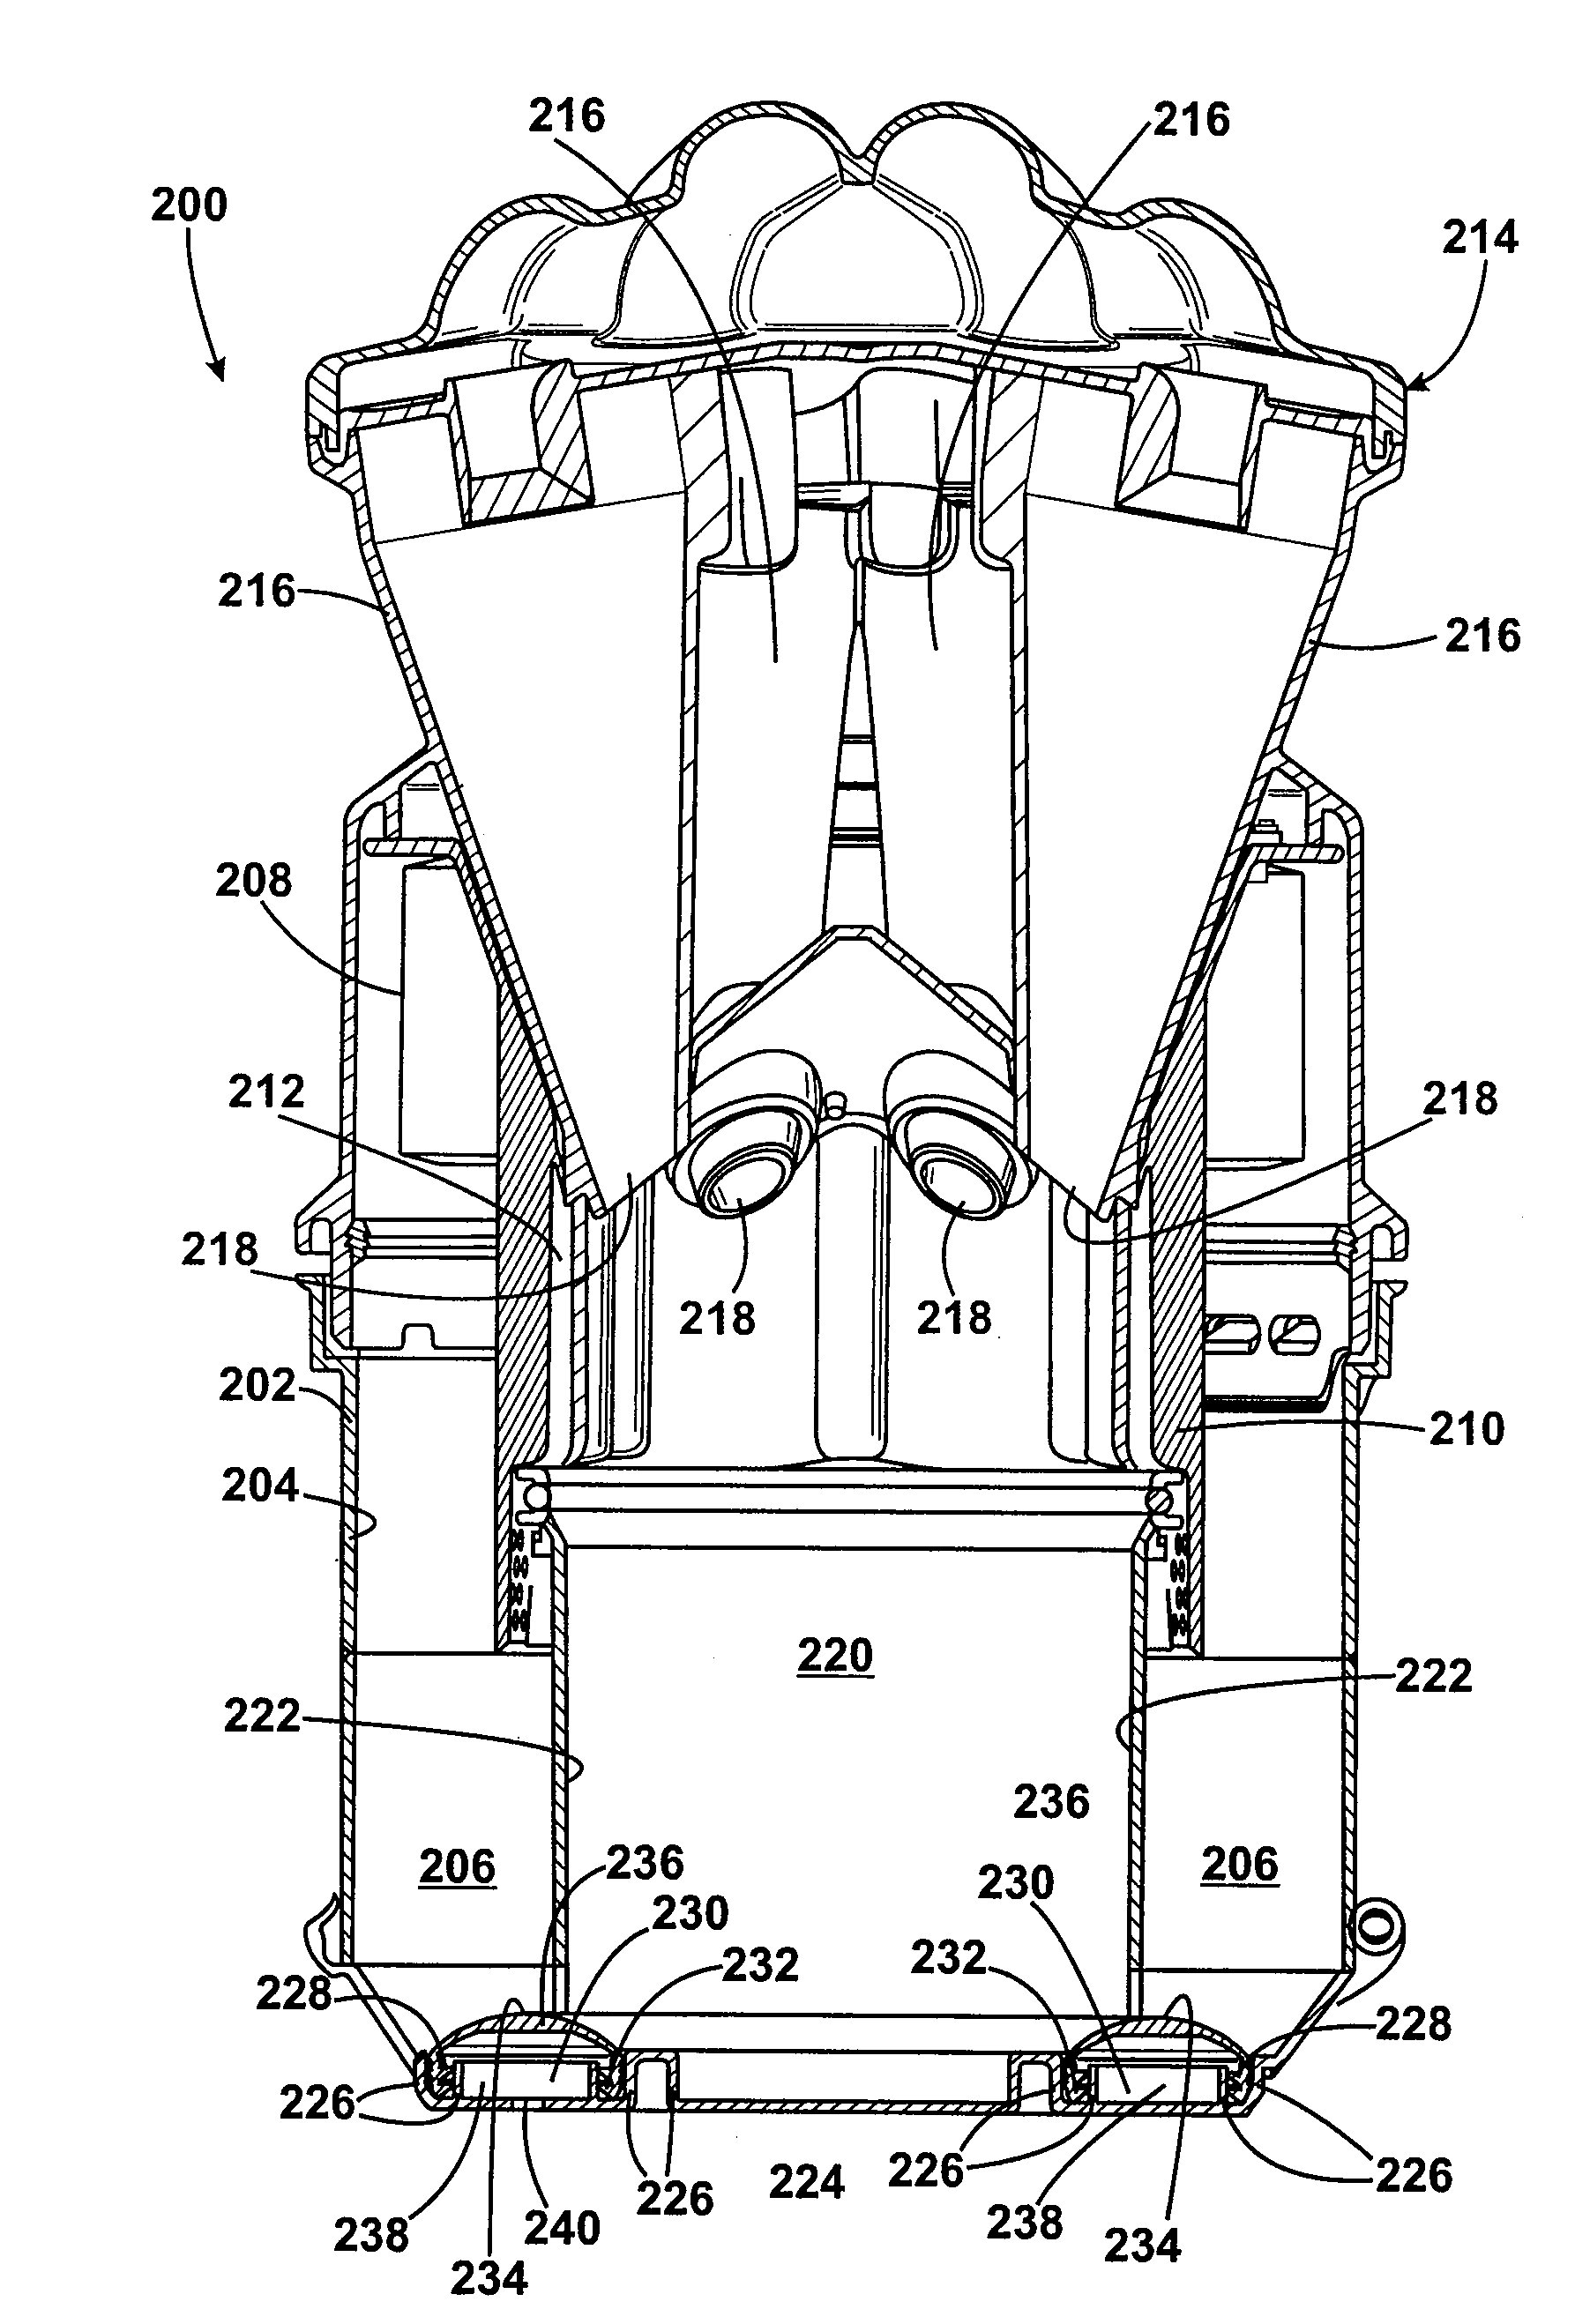 Cyclonic separating apparatus for a cleaning appliance